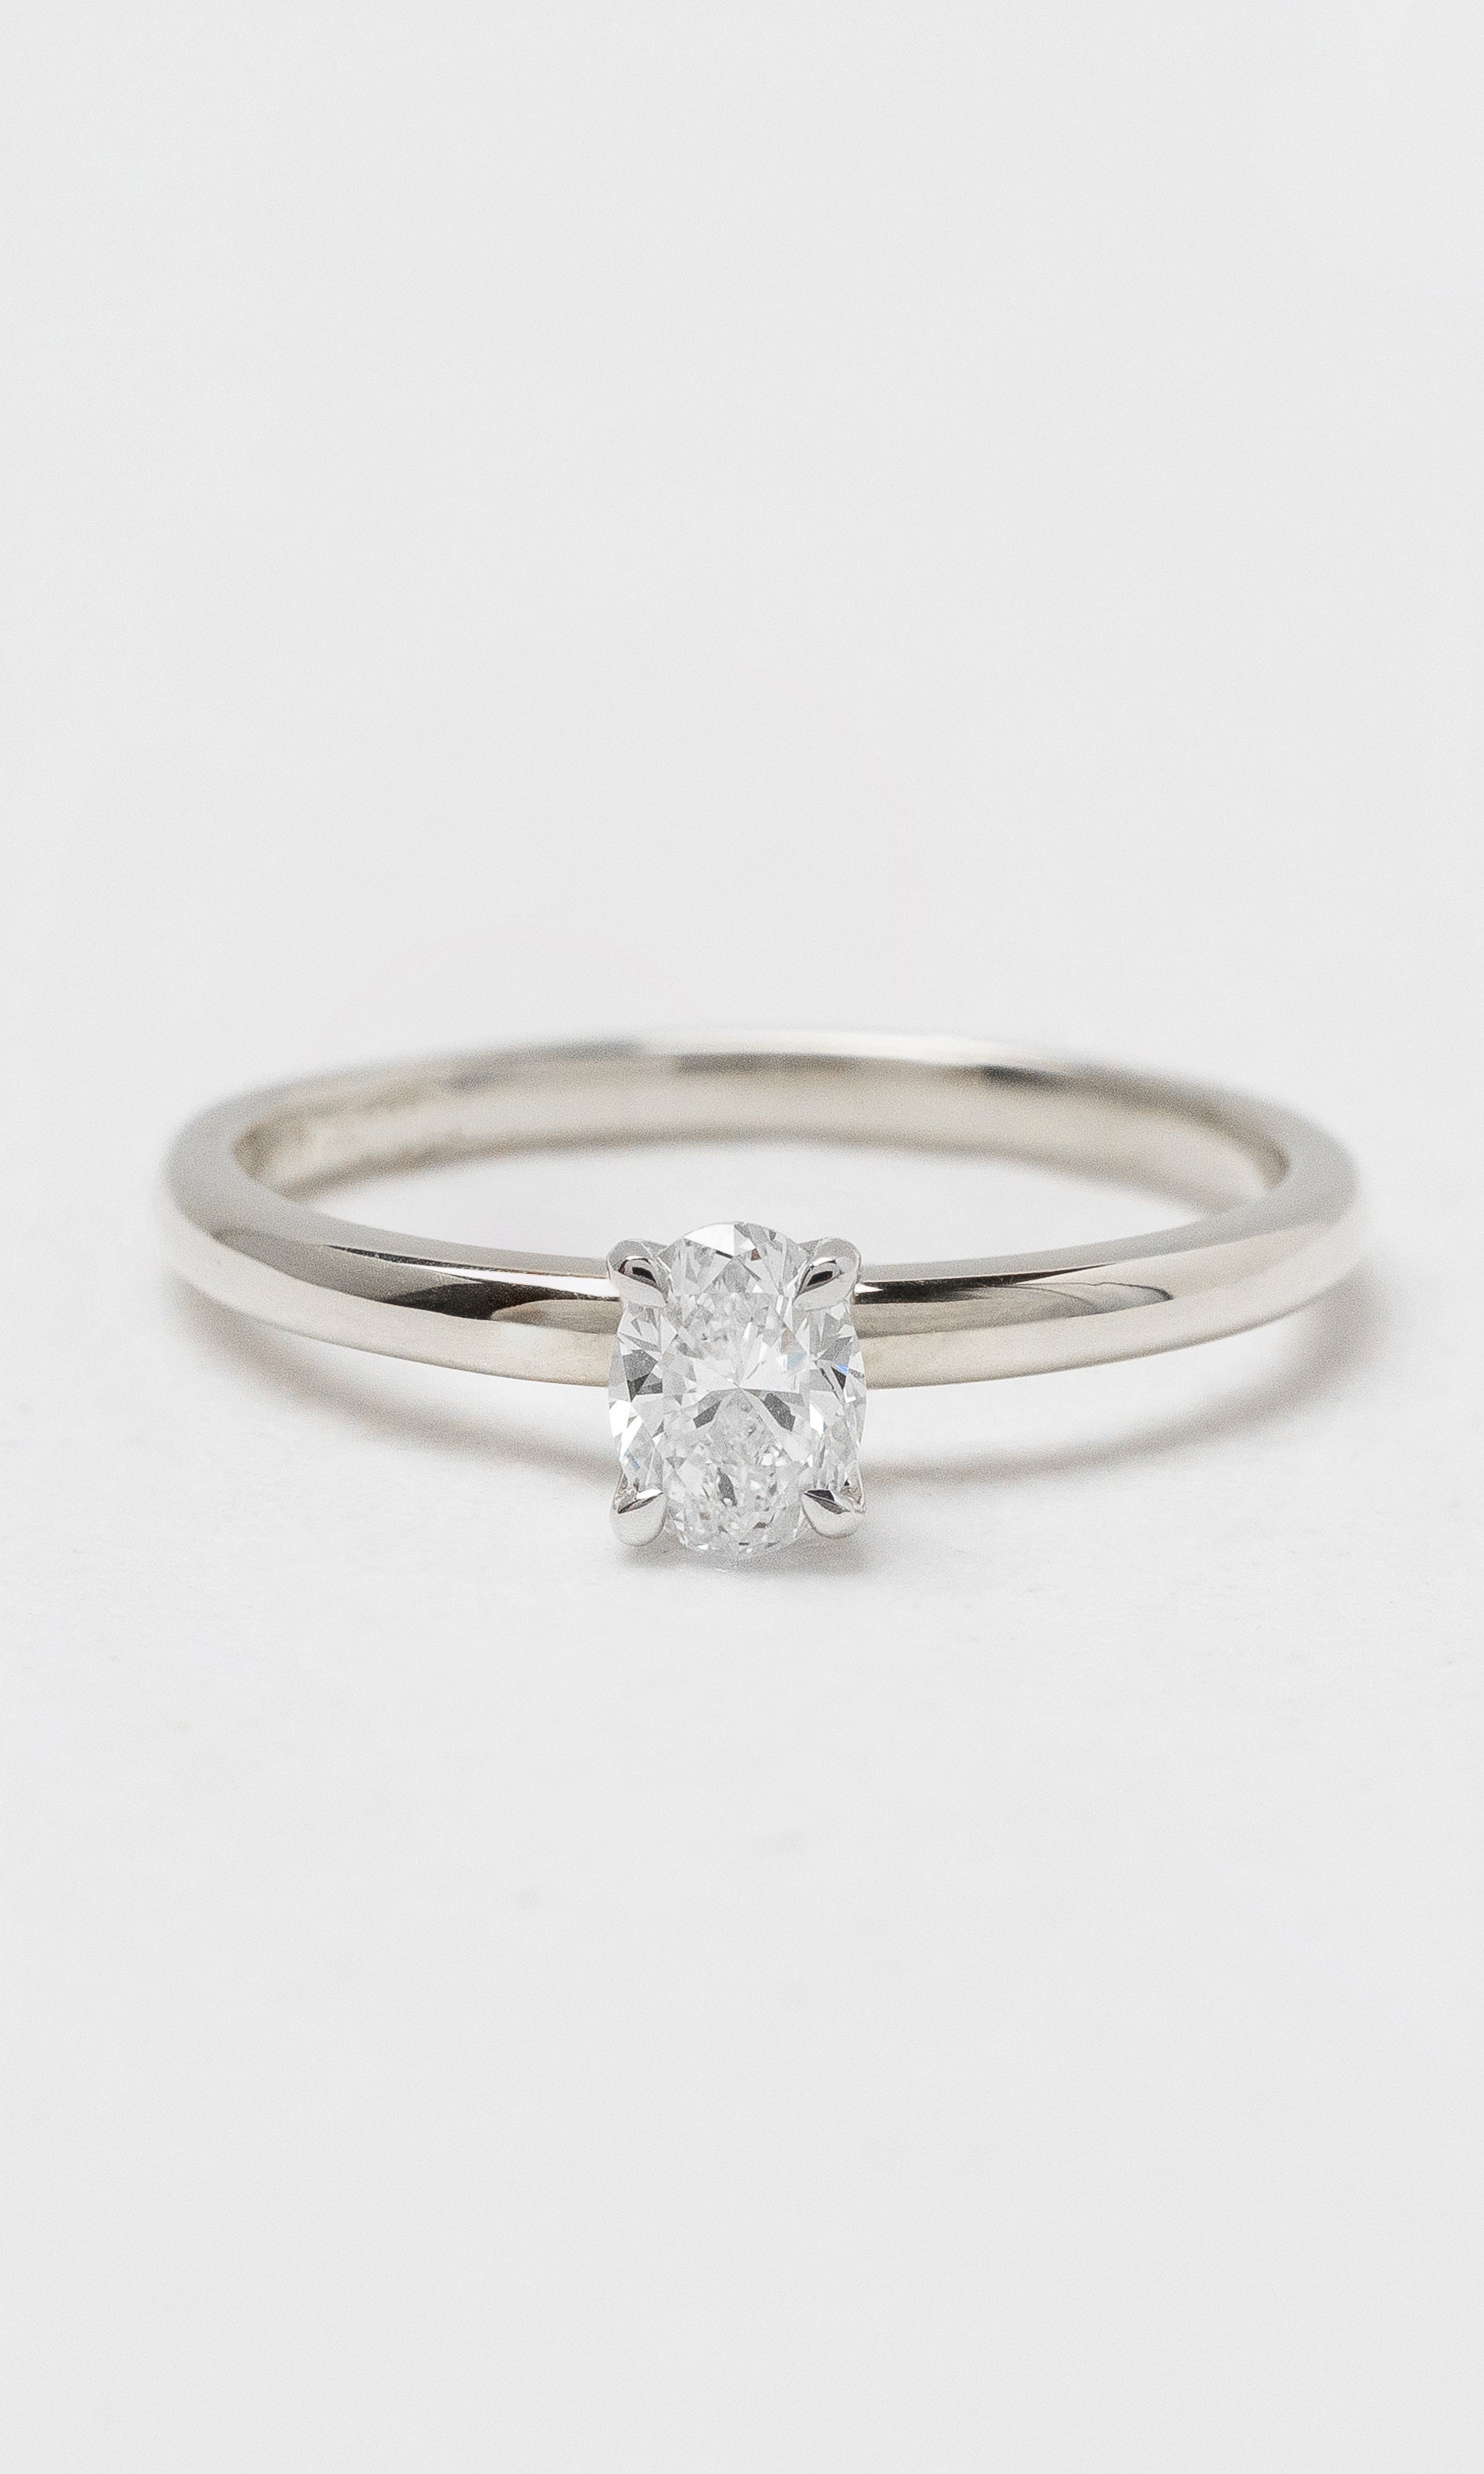 18K WG Oval Solitaire Diamond Ring